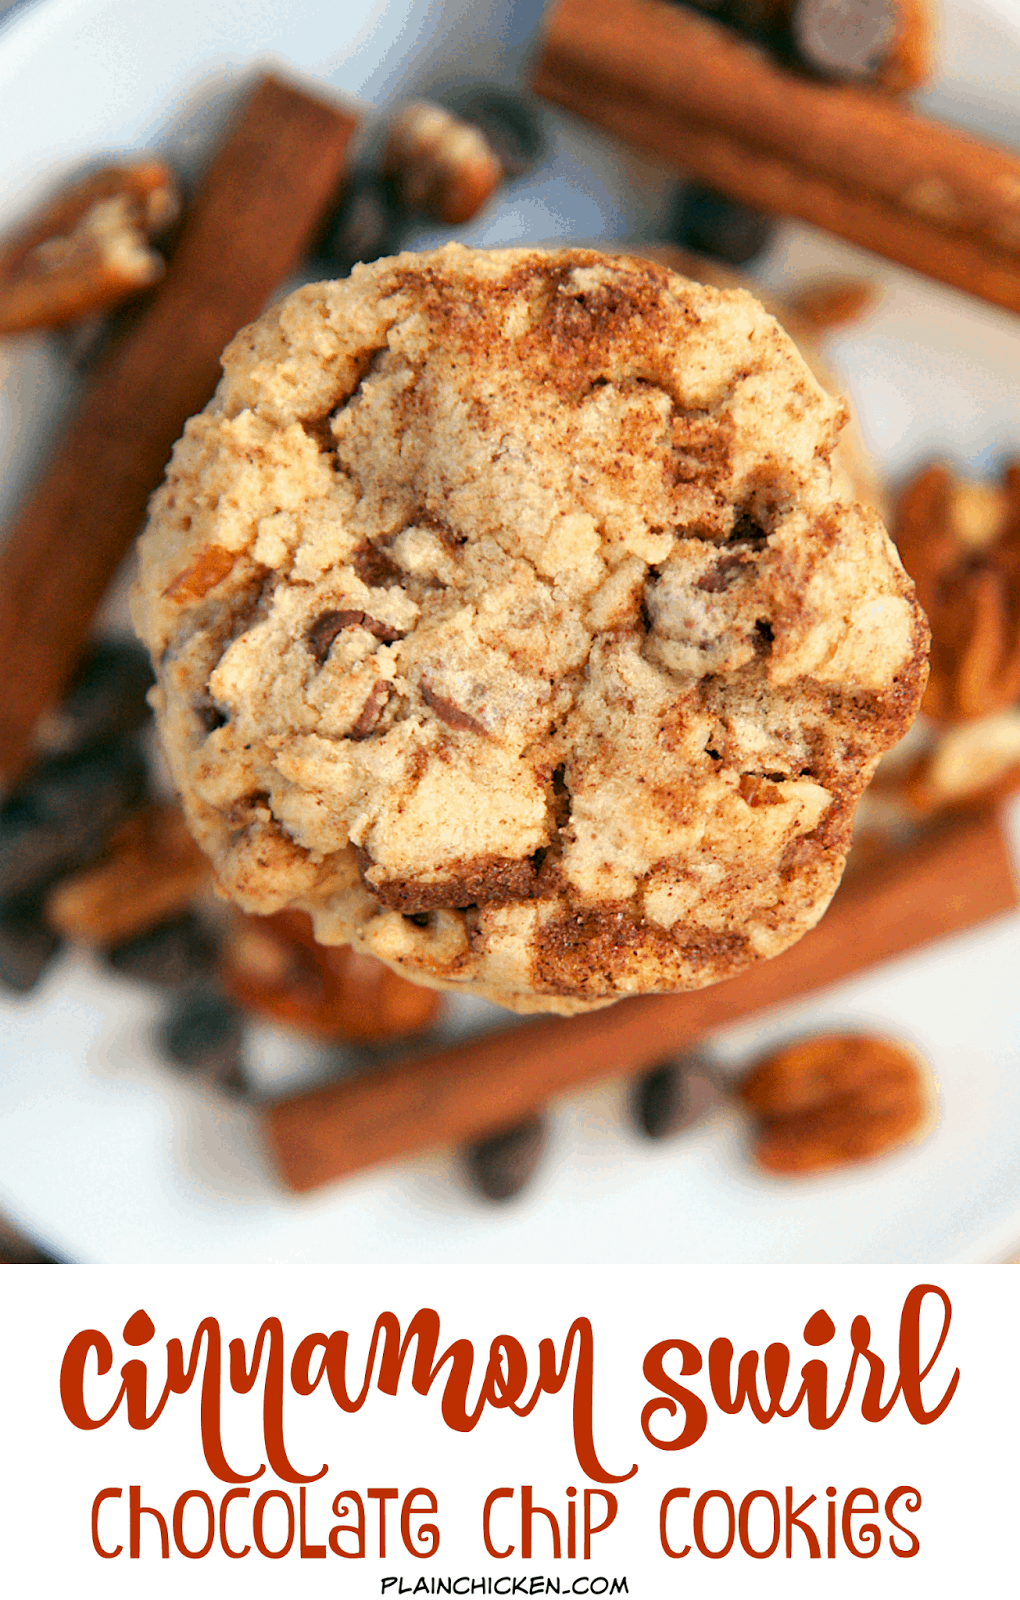 Cinnamon Swirl Chocolate Chip Cookies recipe - homemade chocolate chip cookies with a cinnamon swirl inside! SO delicious! Great for a cookie swap. Can scoop dough and freeze to bake later.